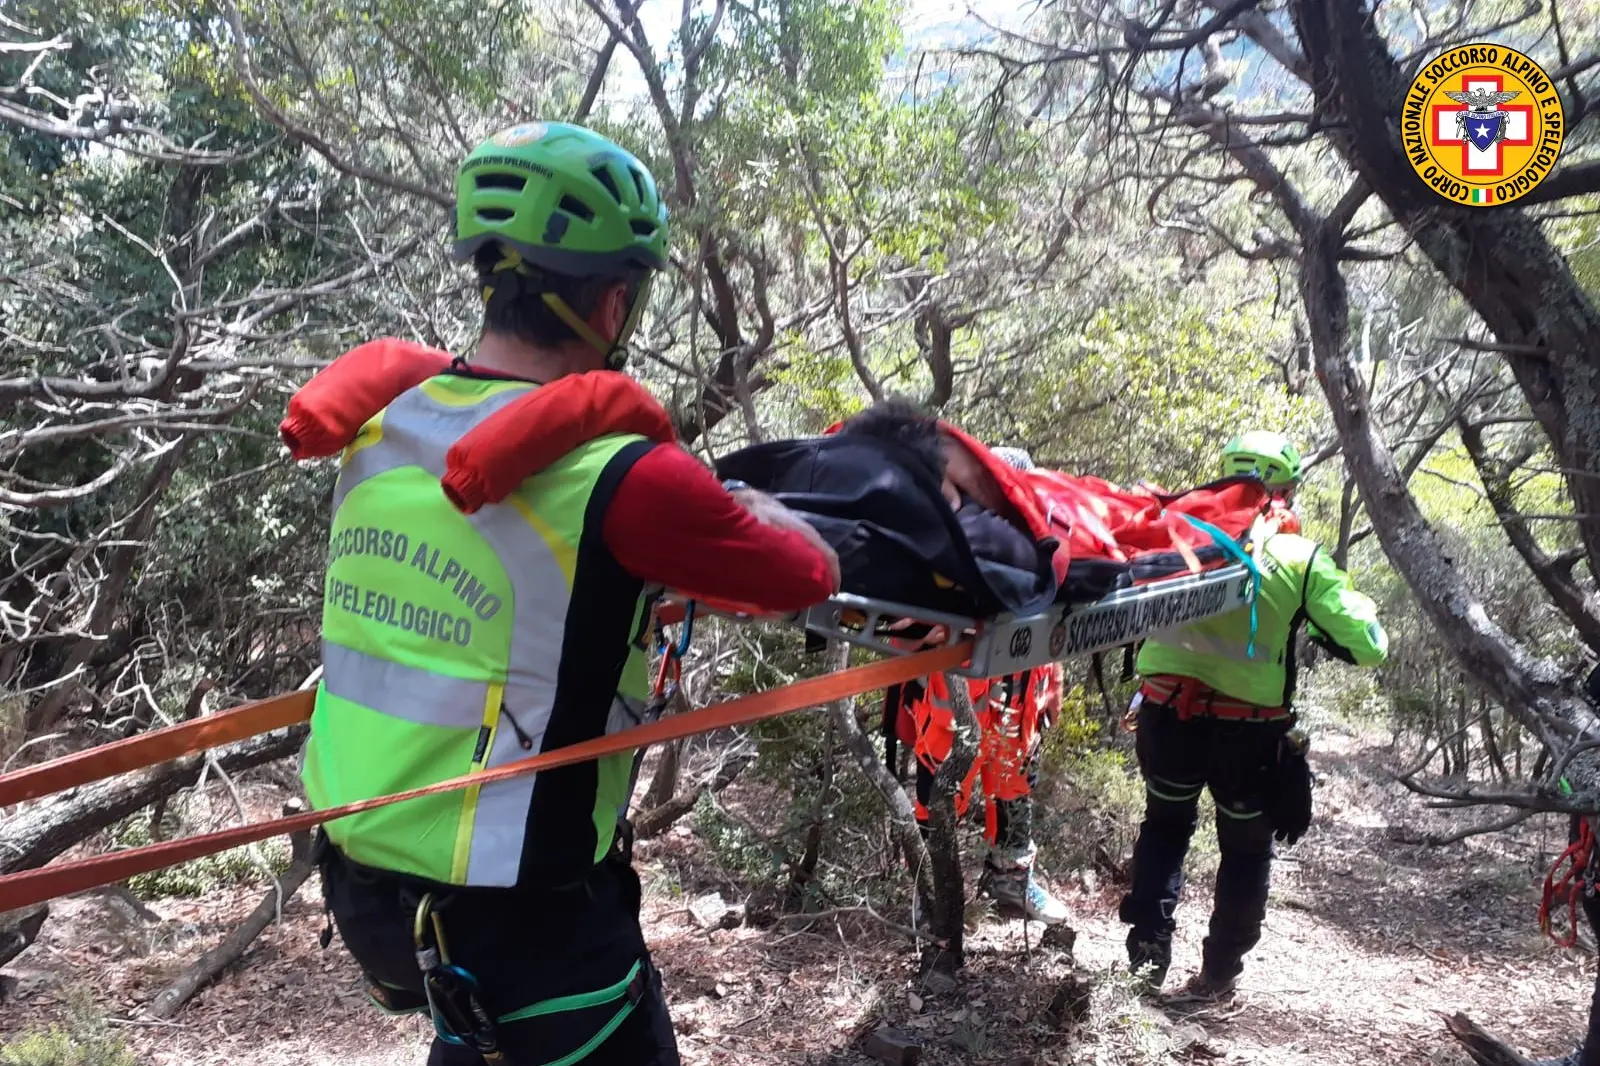 Transport of the injured person (Photo Alpine Rescue)